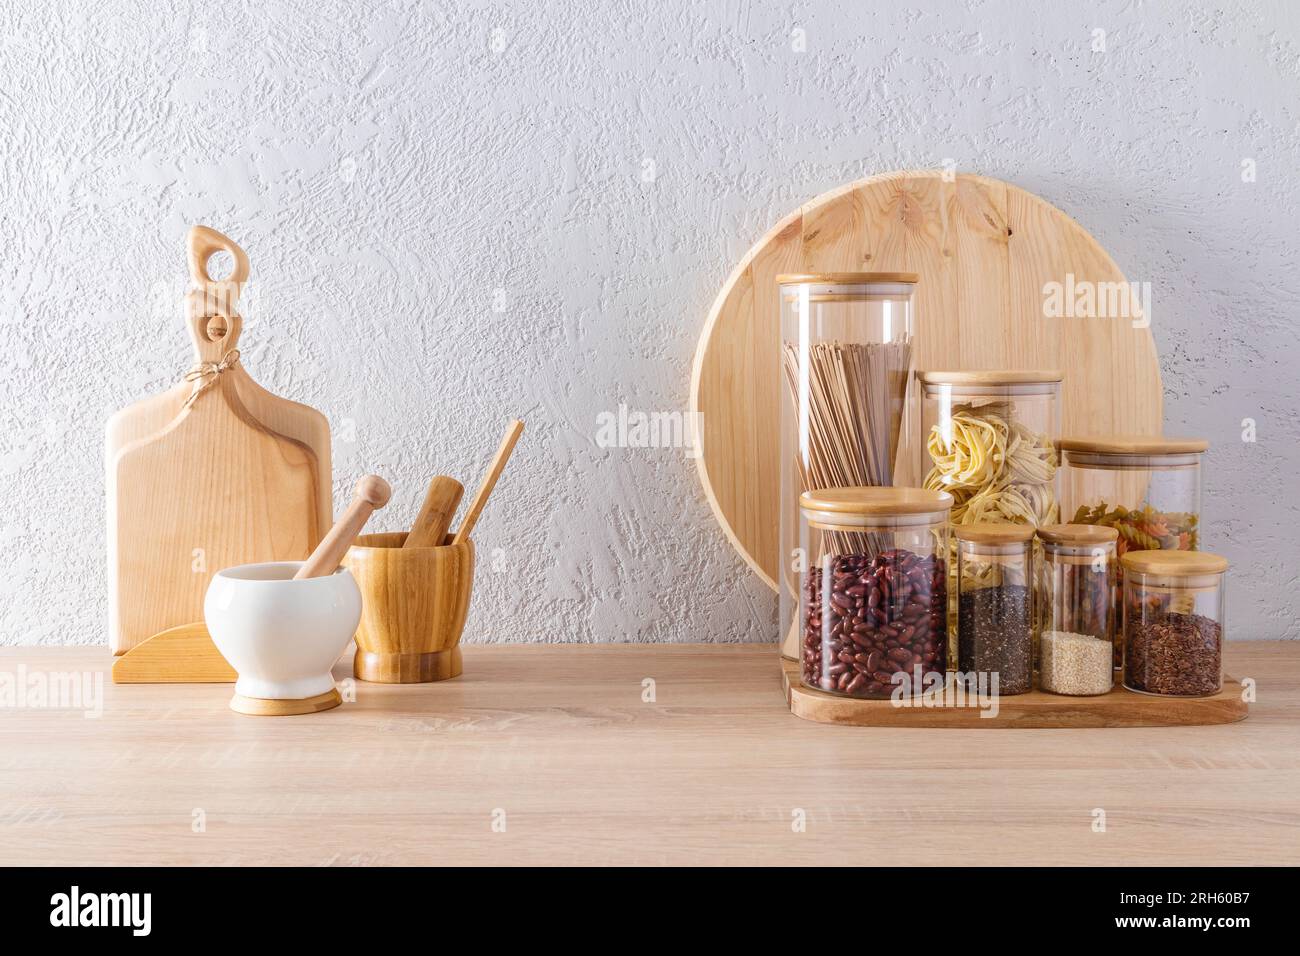 https://c8.alamy.com/comp/2RH60B7/eco-friendly-tools-on-the-kitchen-wooden-countertop-against-a-gray-textured-wall-jars-for-storing-bulk-products-modern-kitchen-space-2RH60B7.jpg